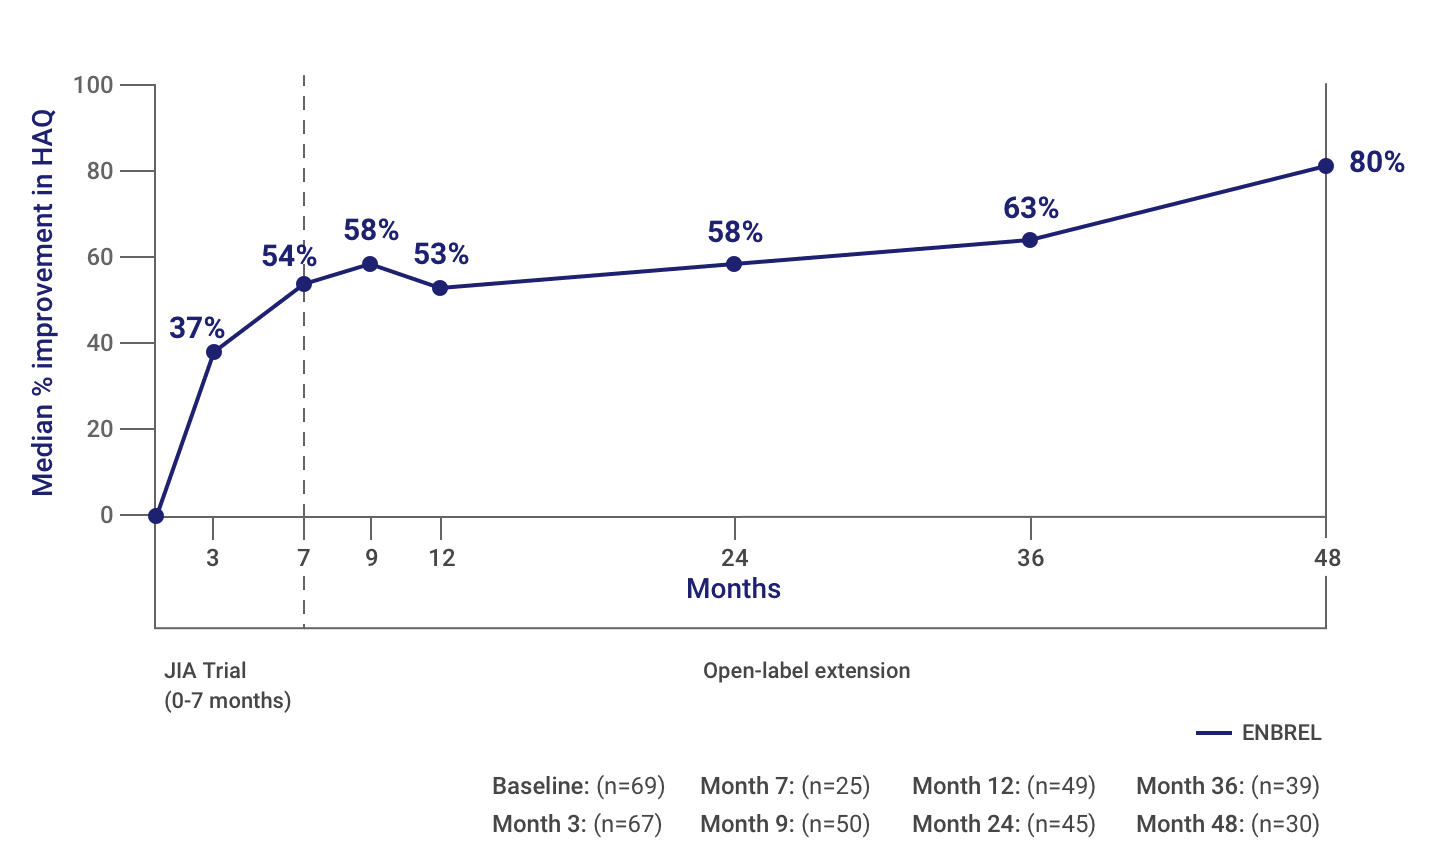 Enbrel® (etanercept) patients experienced improvement in physical function through 4 years